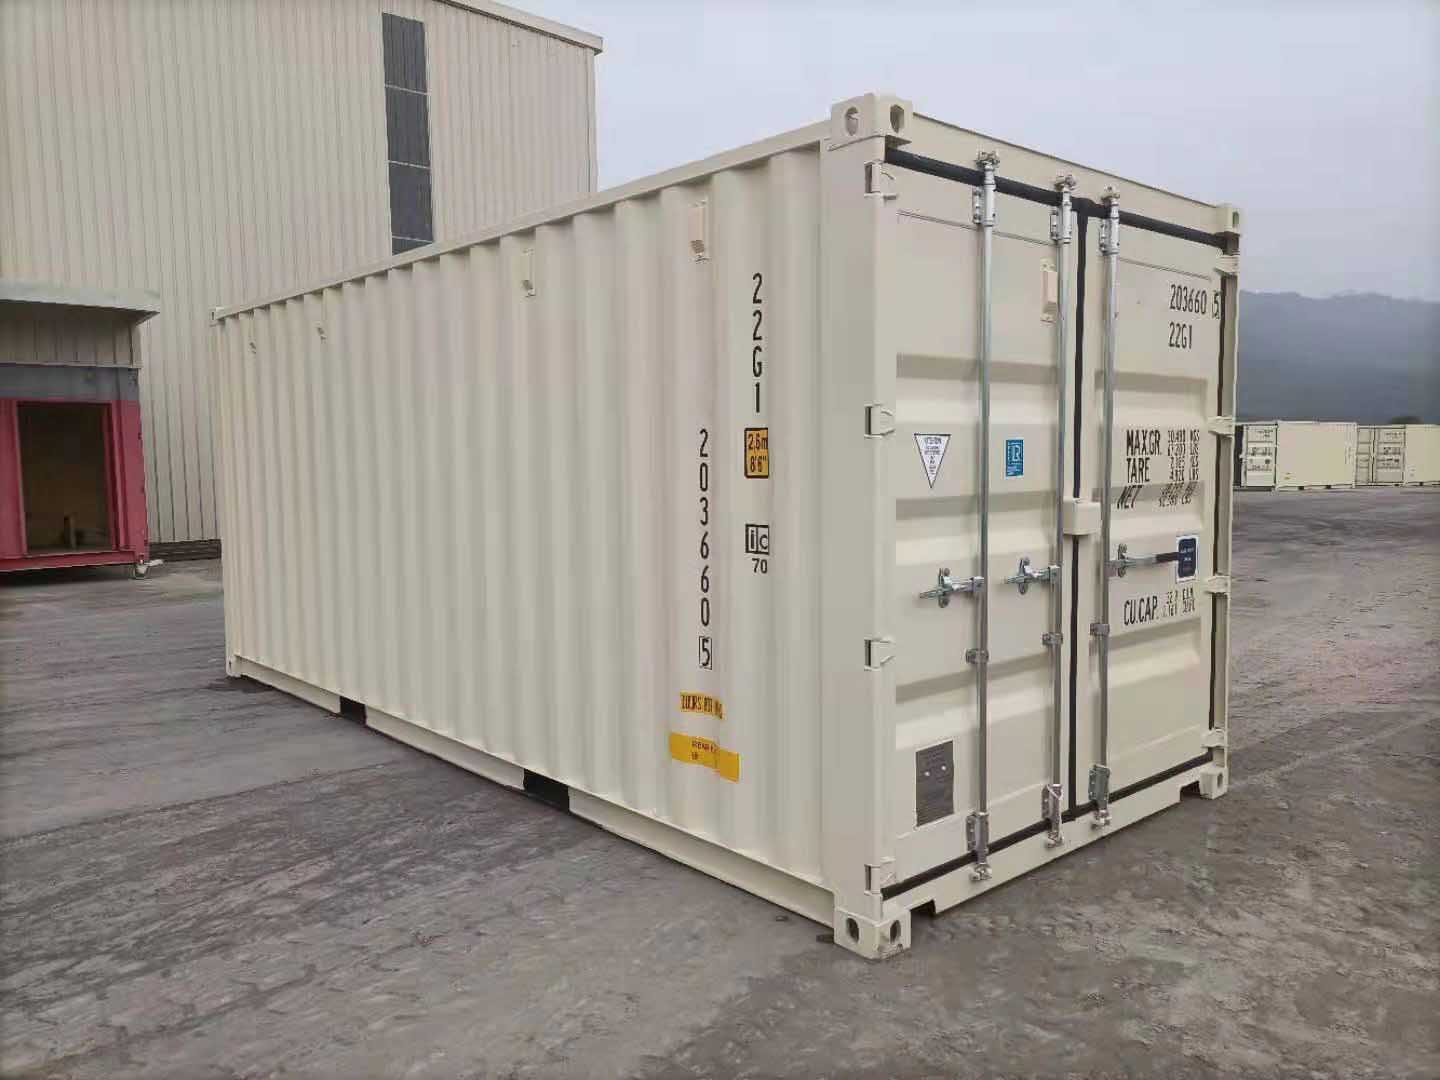 Shipping Containers for Sale in Chula Vista